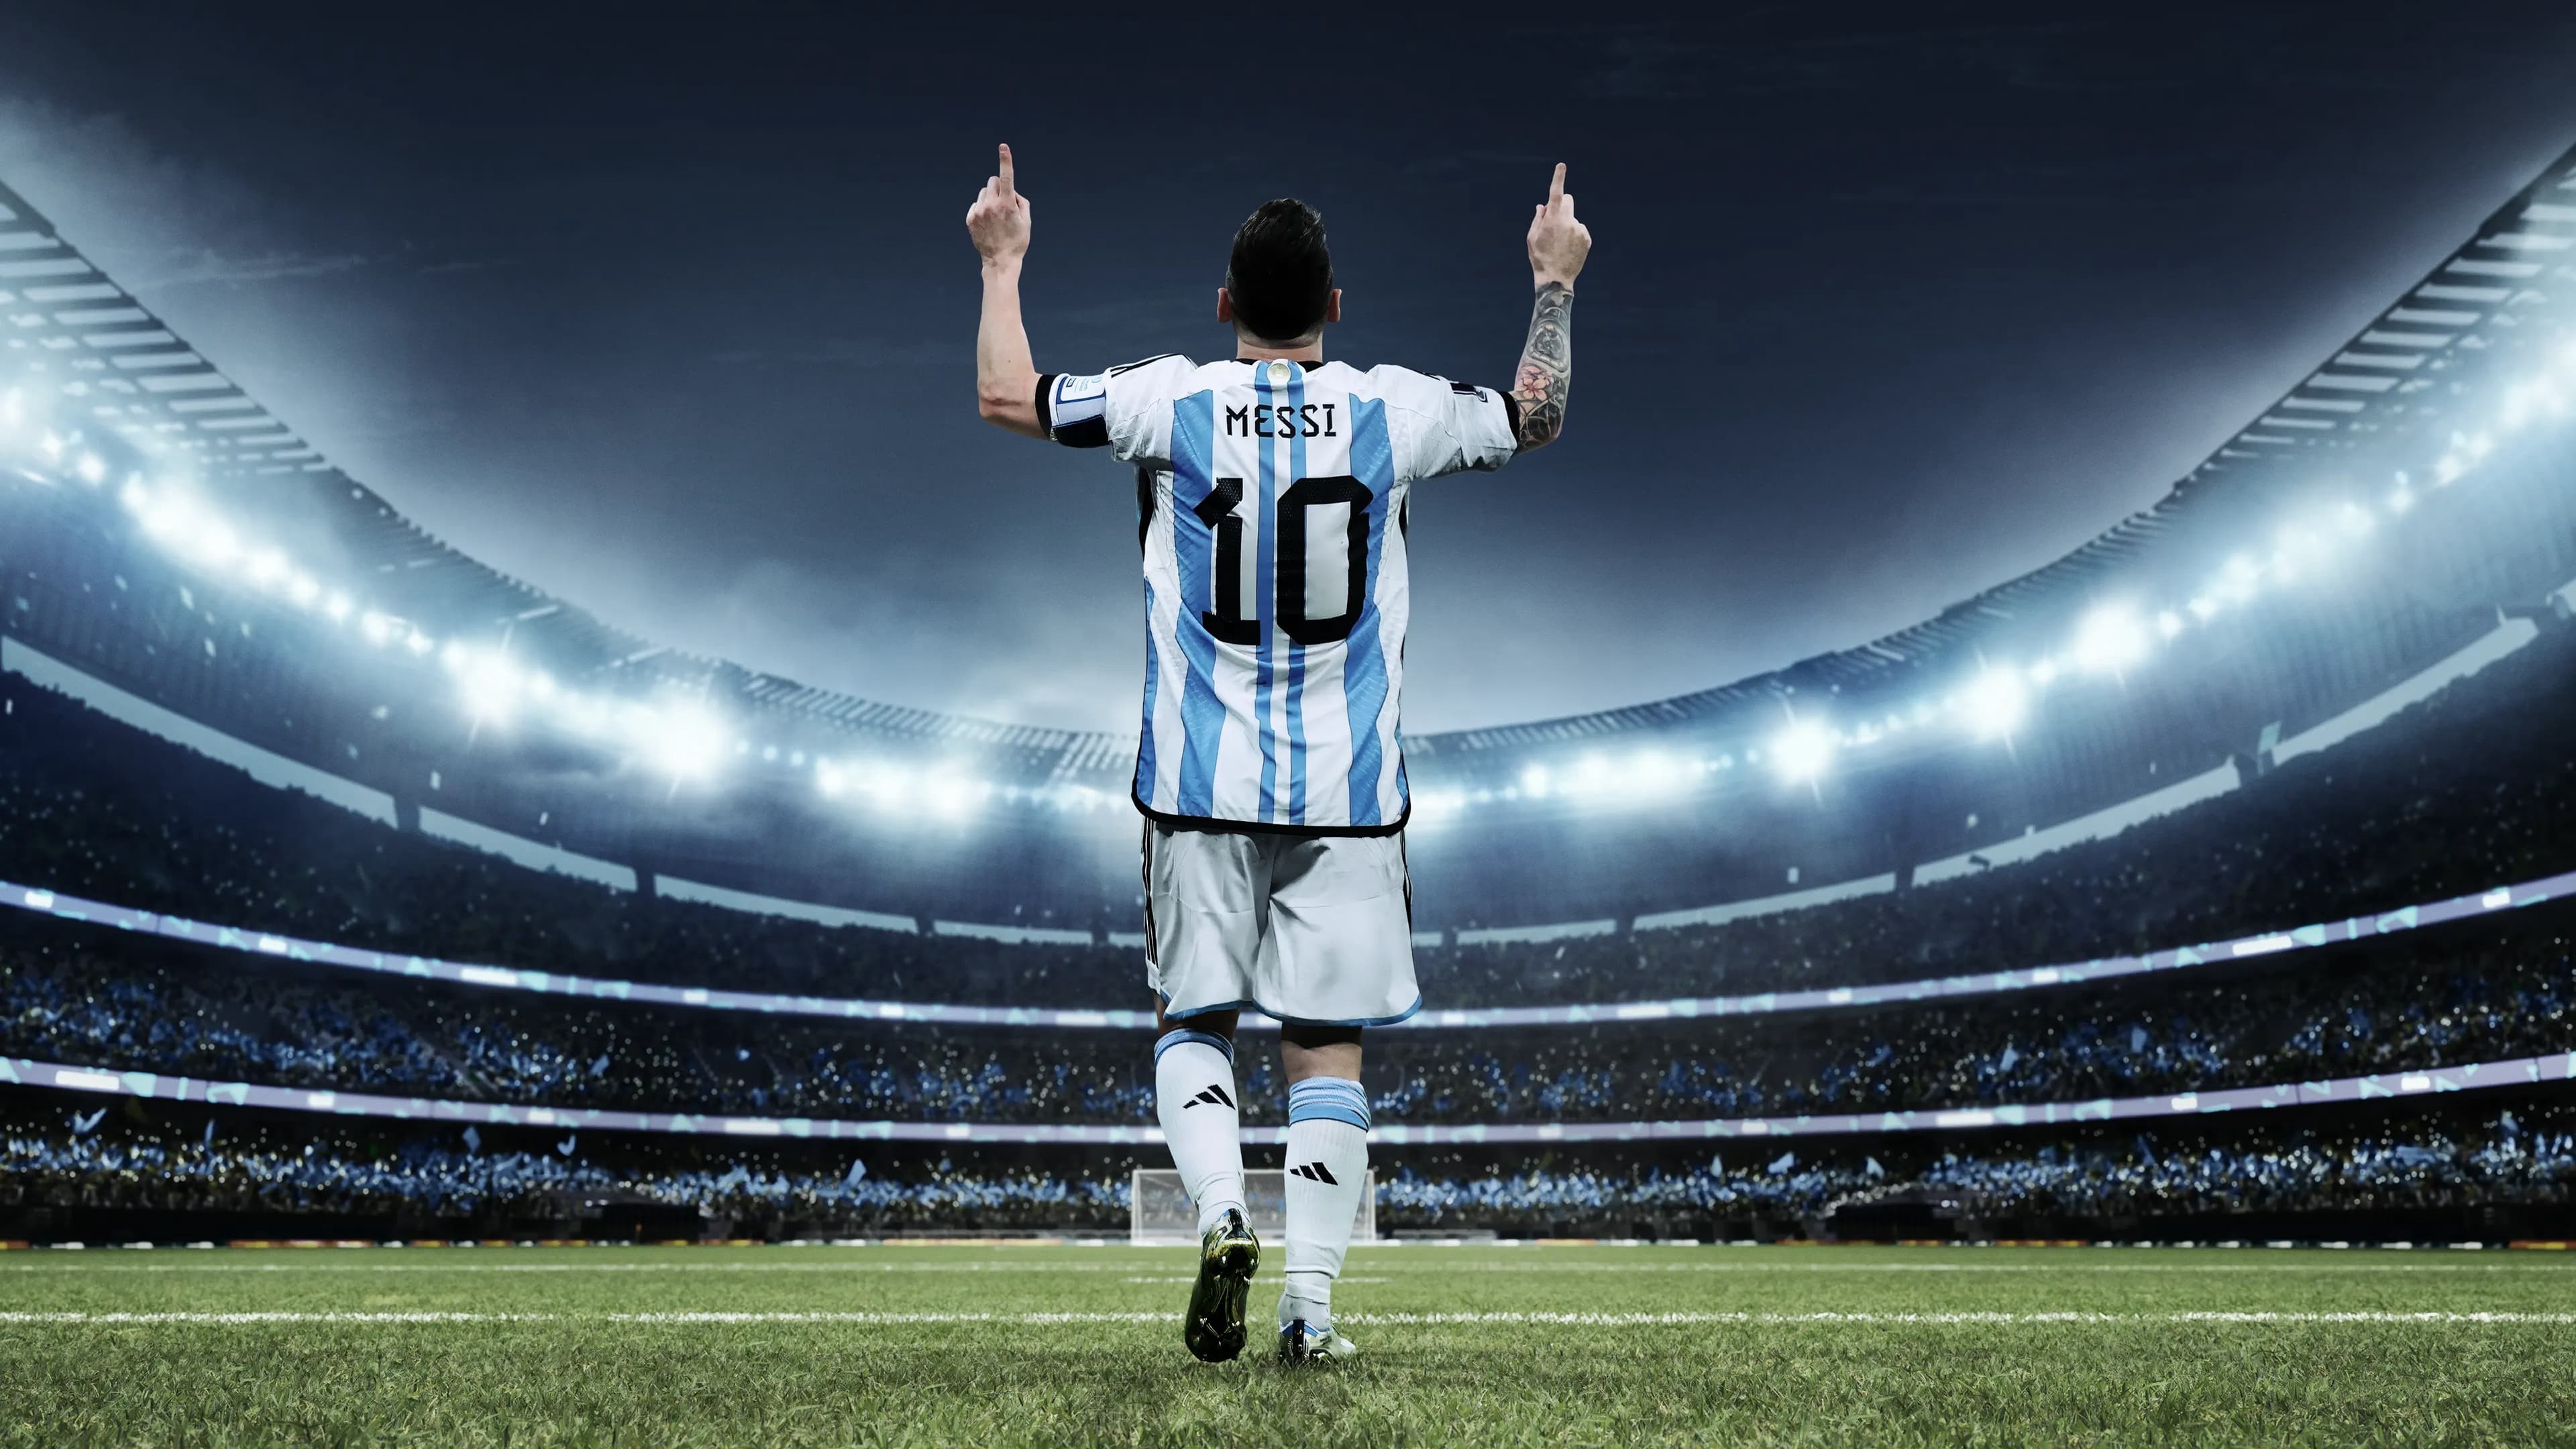 Kỳ World Cup Của Messi: Huyền Thoại Tỏa Sáng - Messi's World Cup: The Rise of a Legend